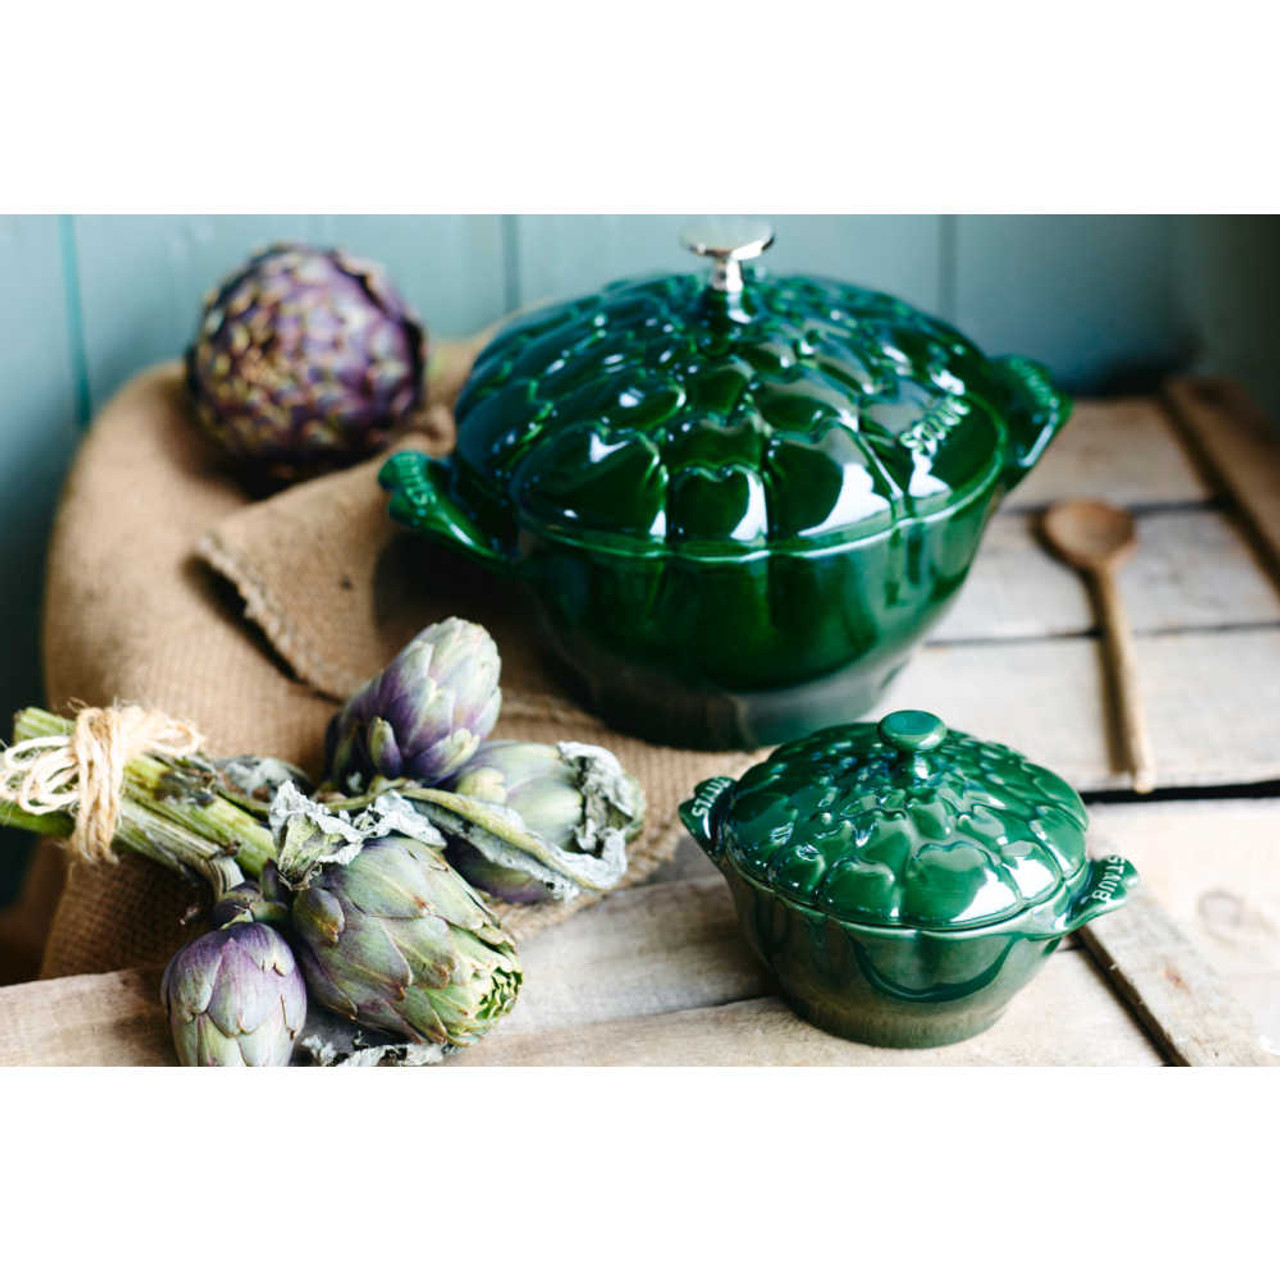 https://cdn11.bigcommerce.com/s-hccytny0od/images/stencil/1280x1280/products/2125/26636/Staub_Cast_Iron_Artichoke_Cocotte_in_Basil__69842.1702586222.jpg?c=2?imbypass=on